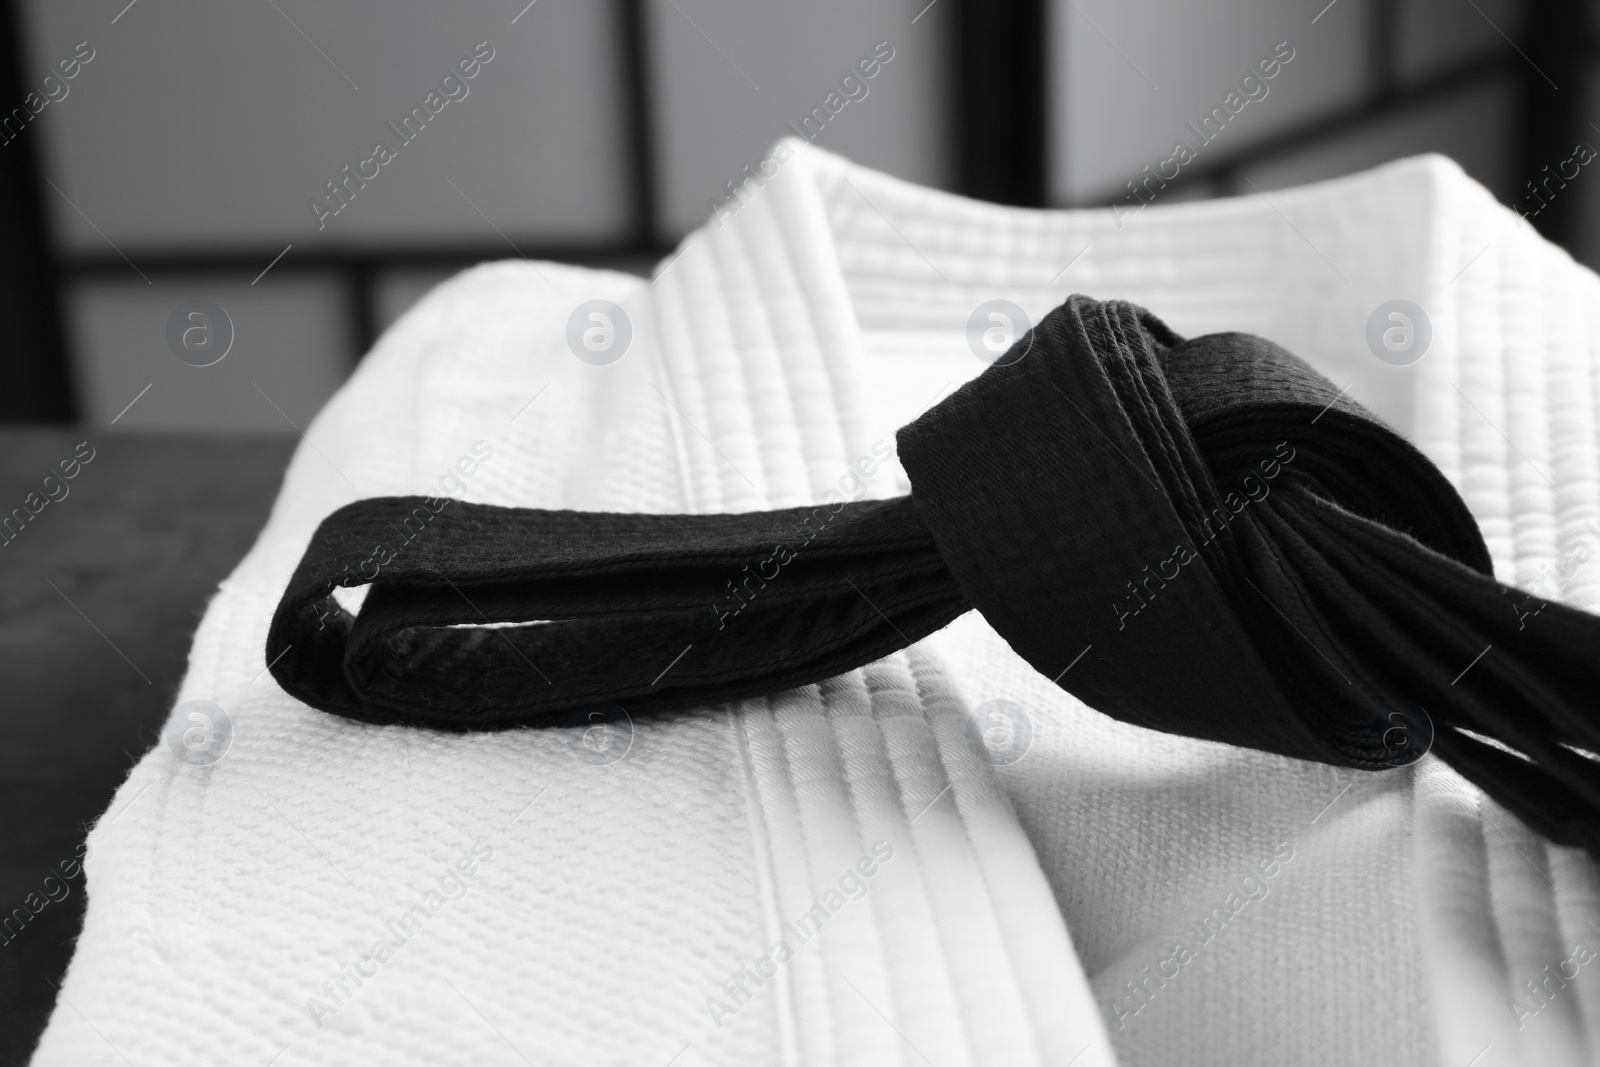 Photo of Martial arts uniform with black belt on table indoors, closeup